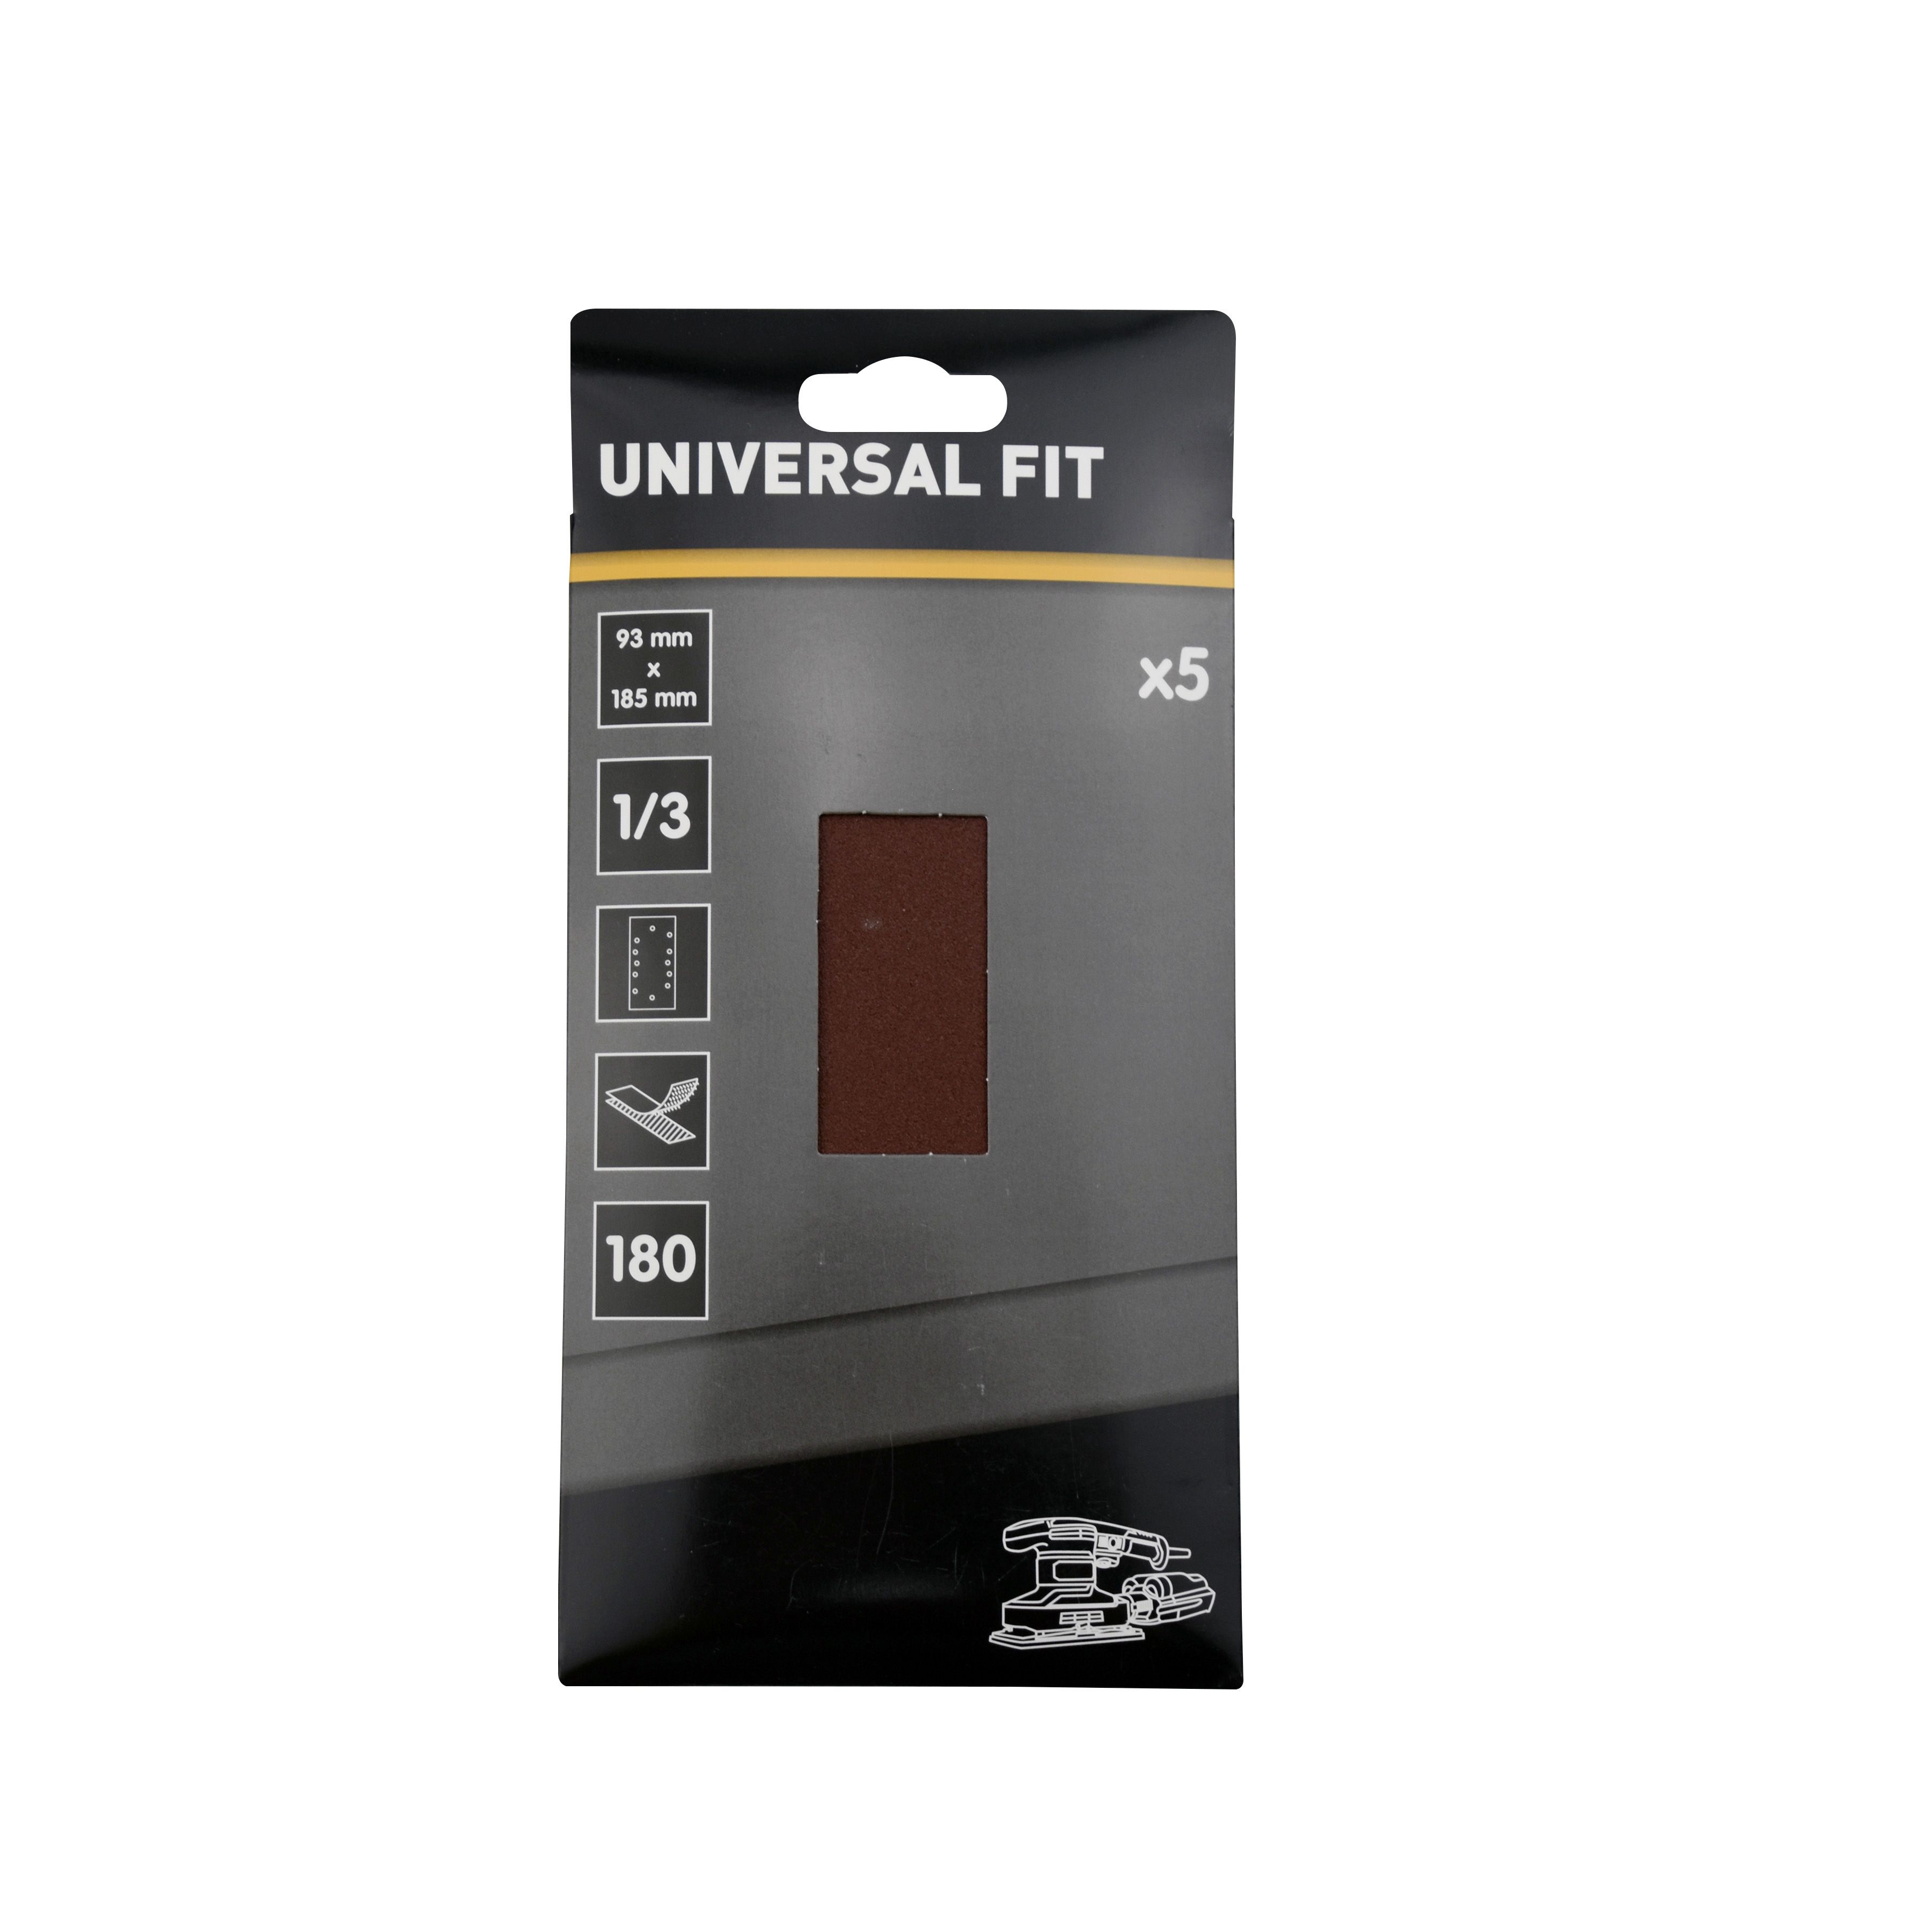 Universal Fit 180 grit Red 1/3 sanding sheet (L)185mm (W)93mm, Pack of 5